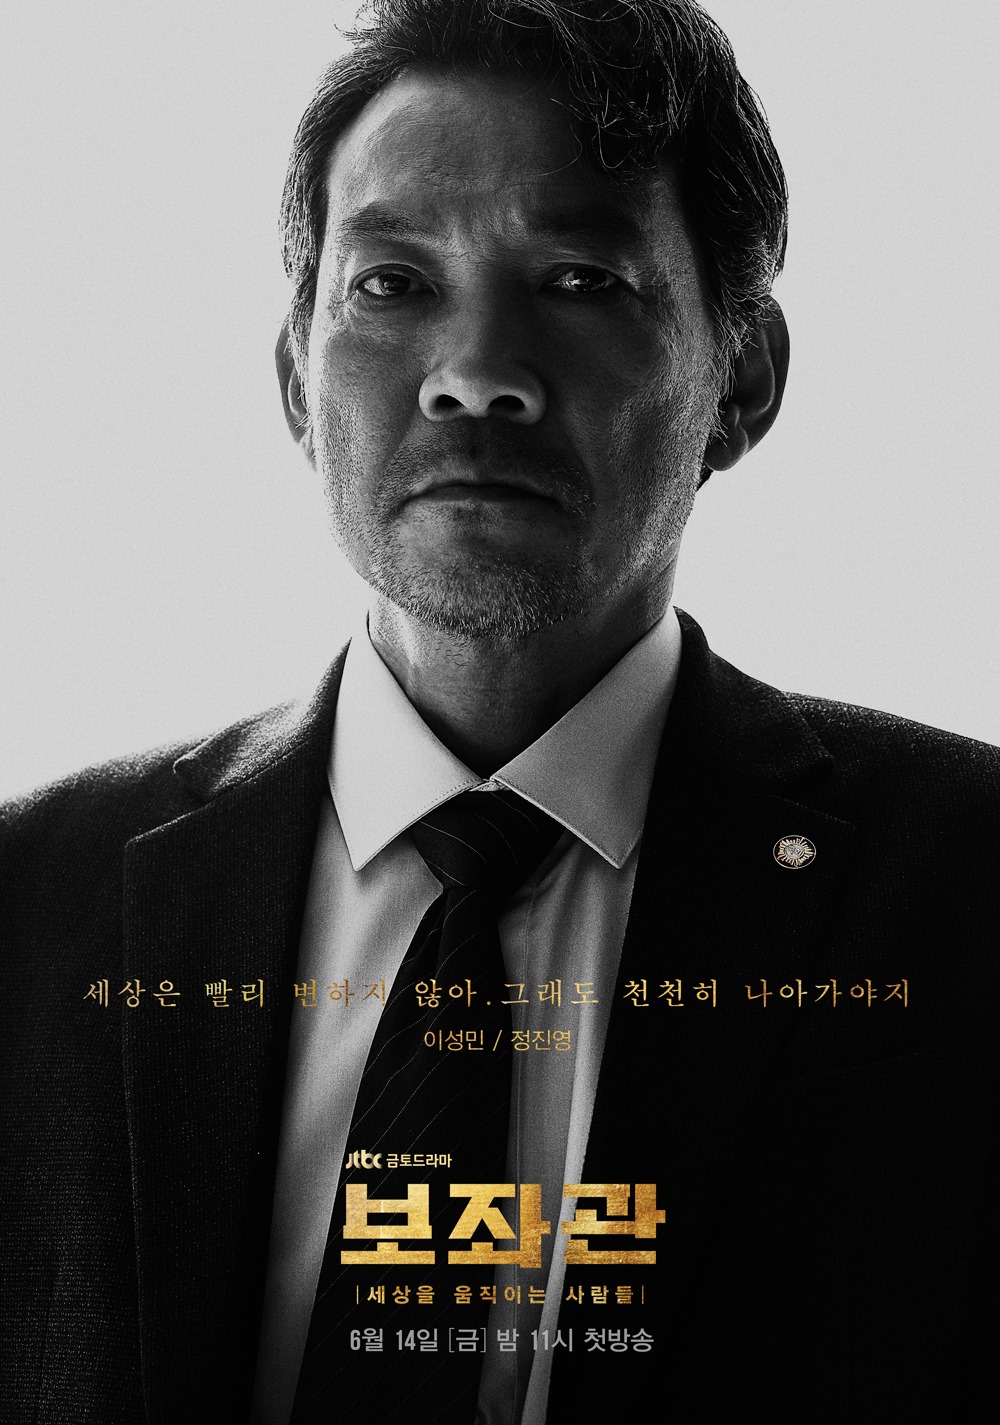 Teaser trailer #2 & character posters for JTBC drama series “Aide ...